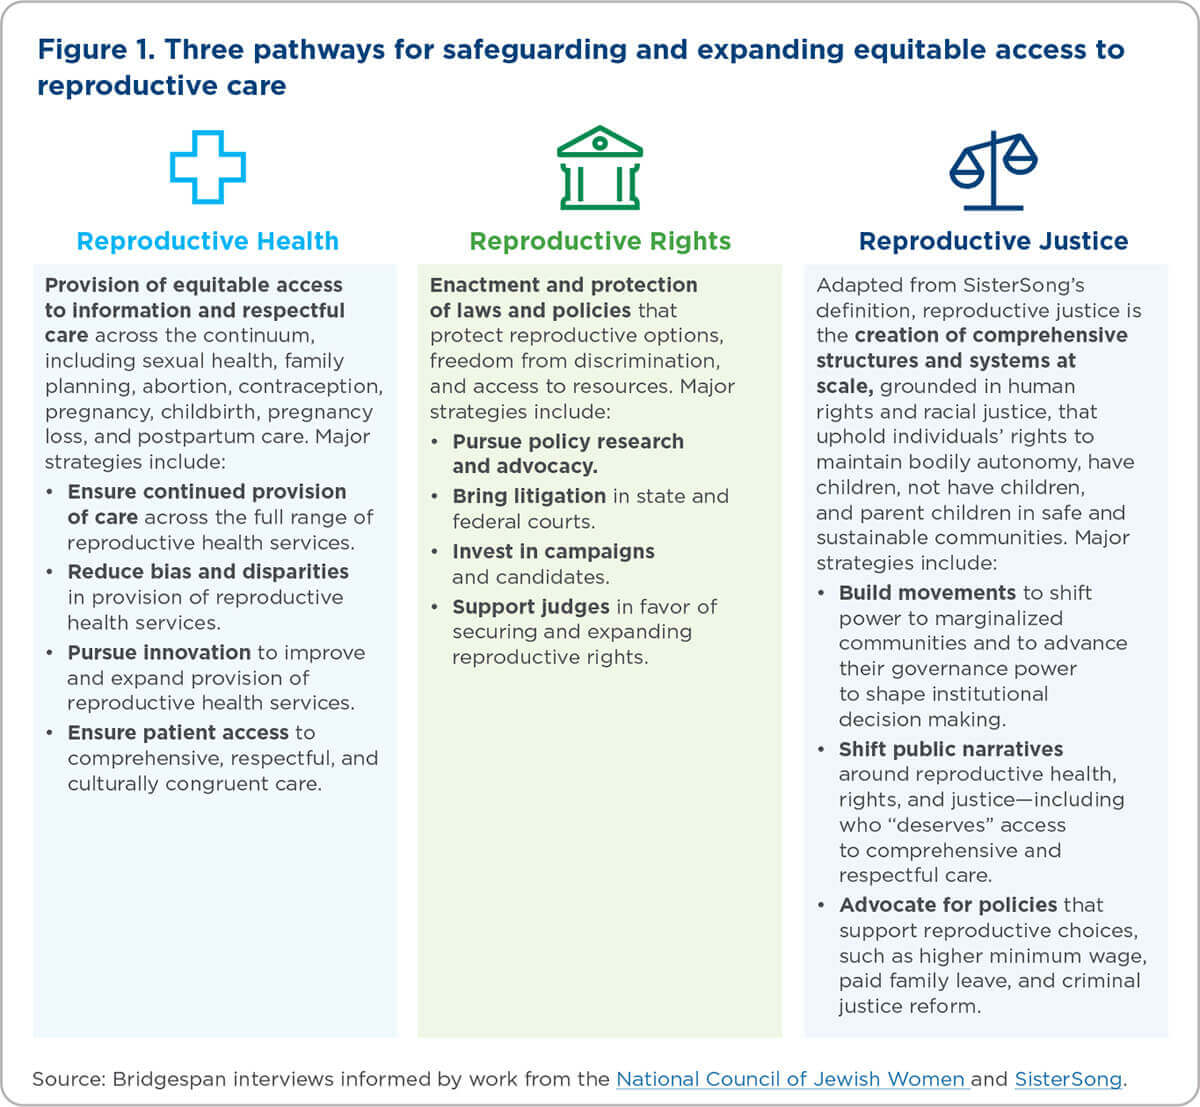 Three pathways for safeguarding and expanding equitable access to reproductive care